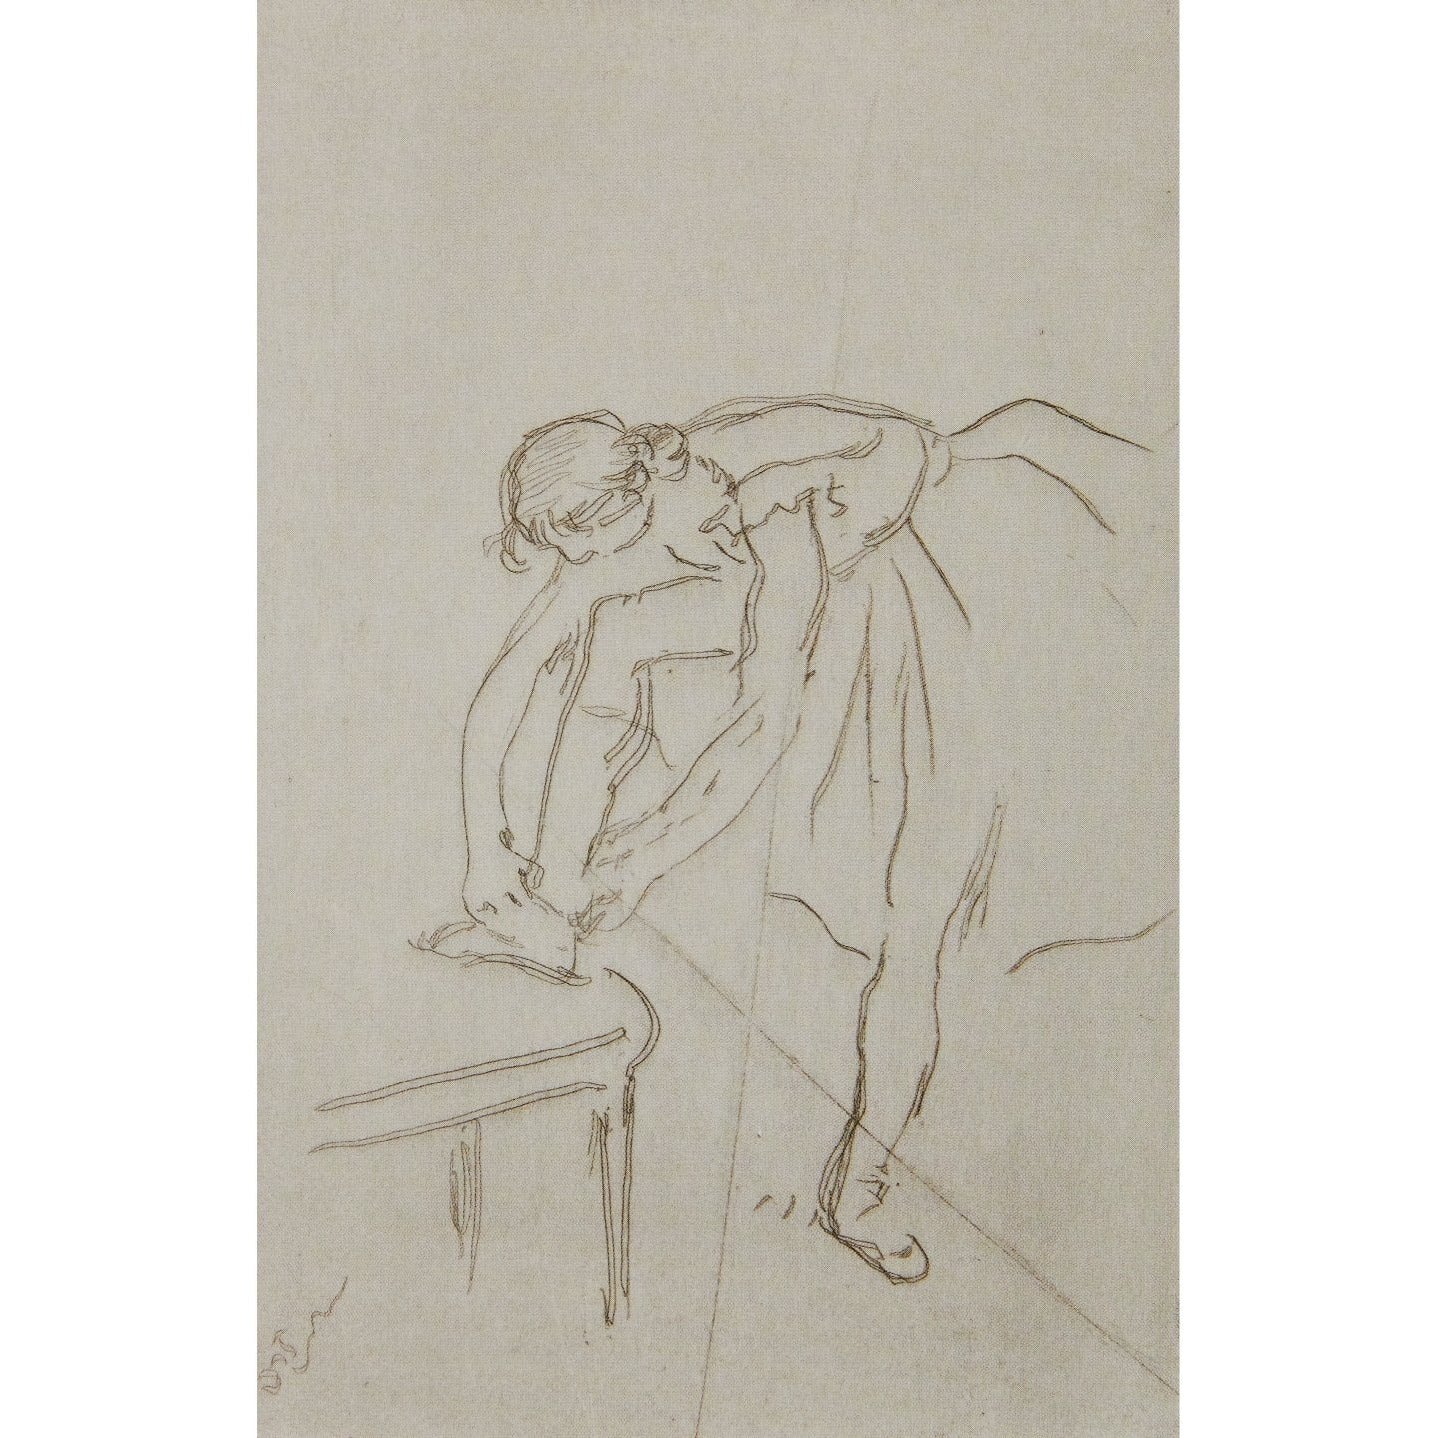 Notecard - Dancer Fastening her Shoe by Edgar Degas. From the collection of the Fitzwilliam Museum, brought to you by CuratingCambridge.co.uk